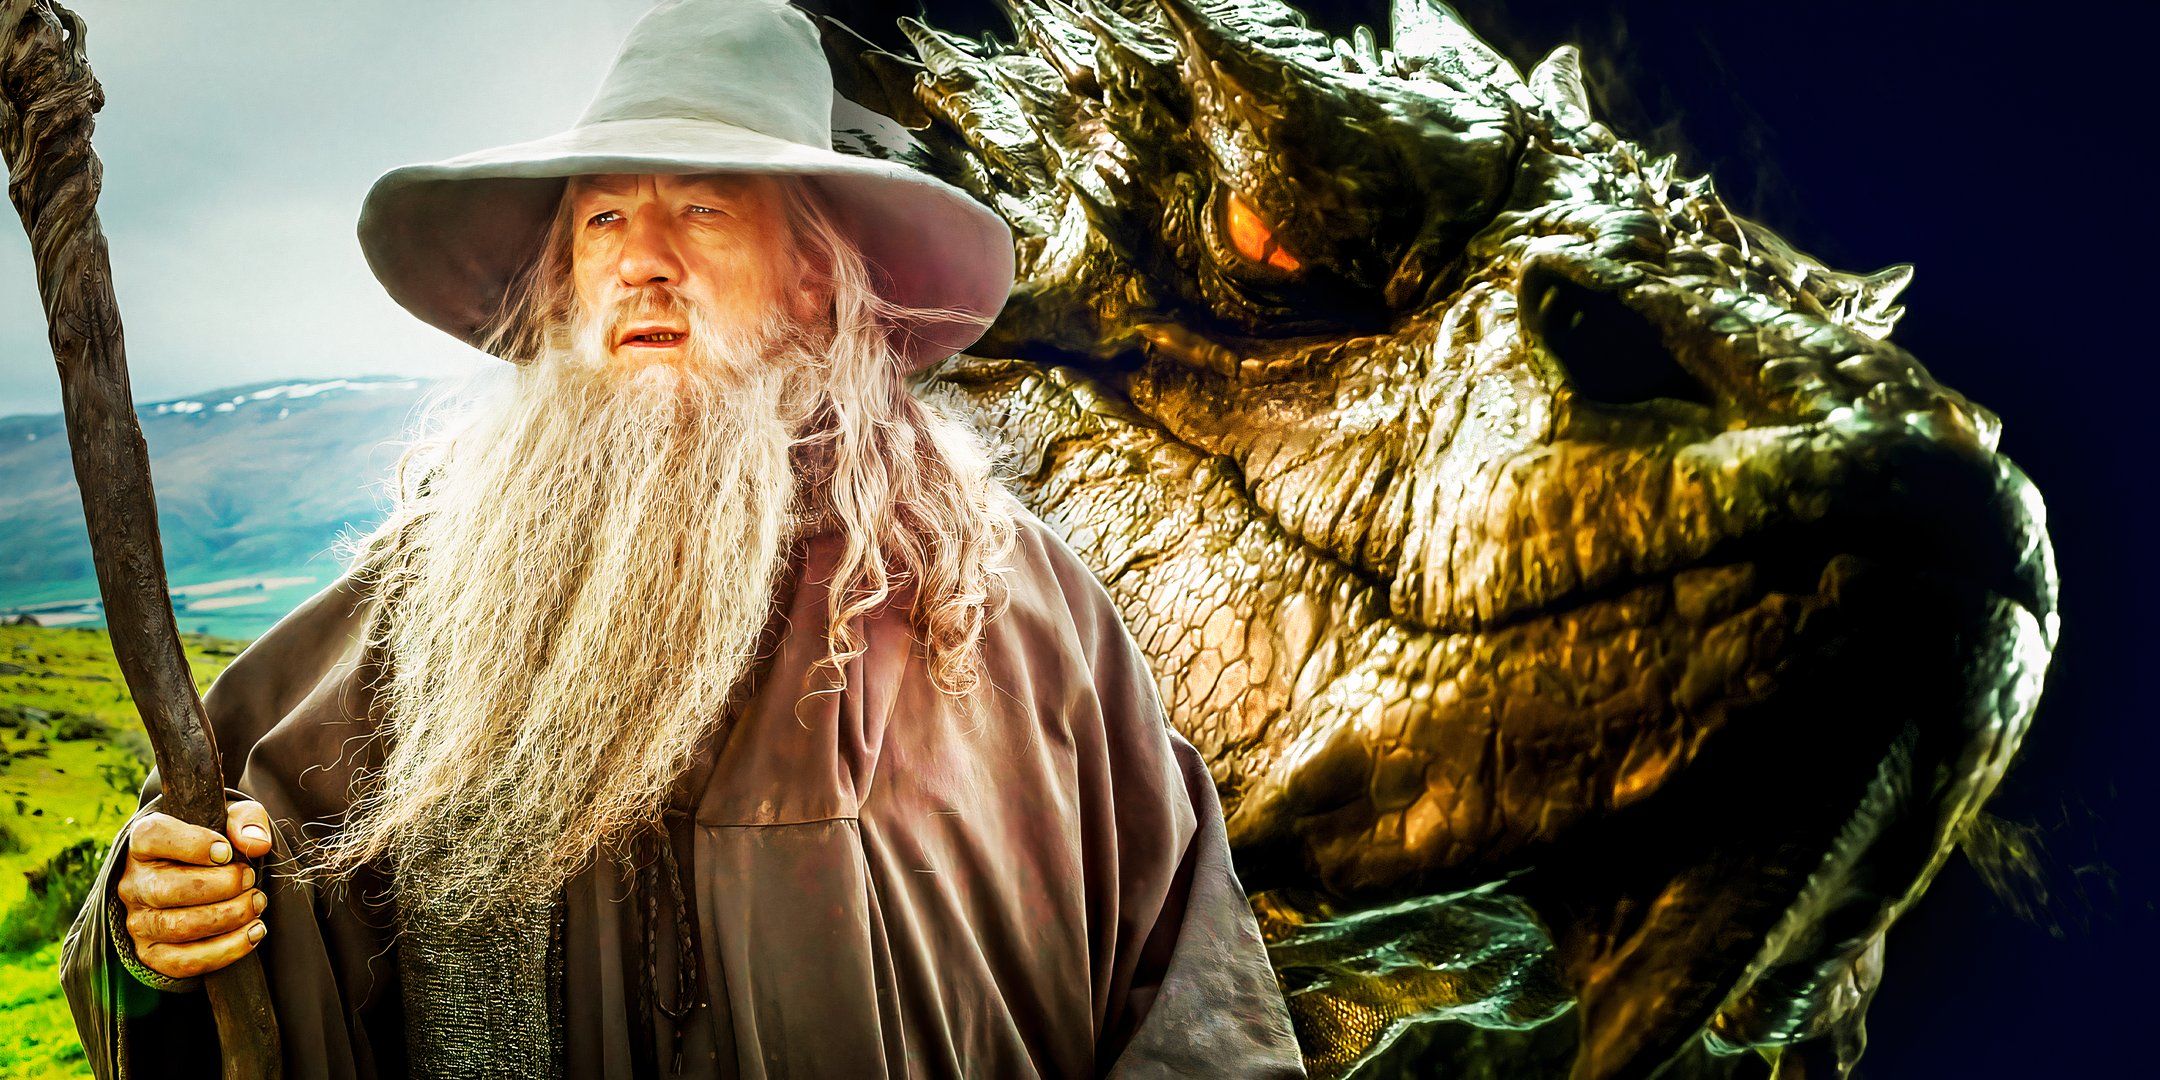 Smaug and Gandalf from The Hobbit